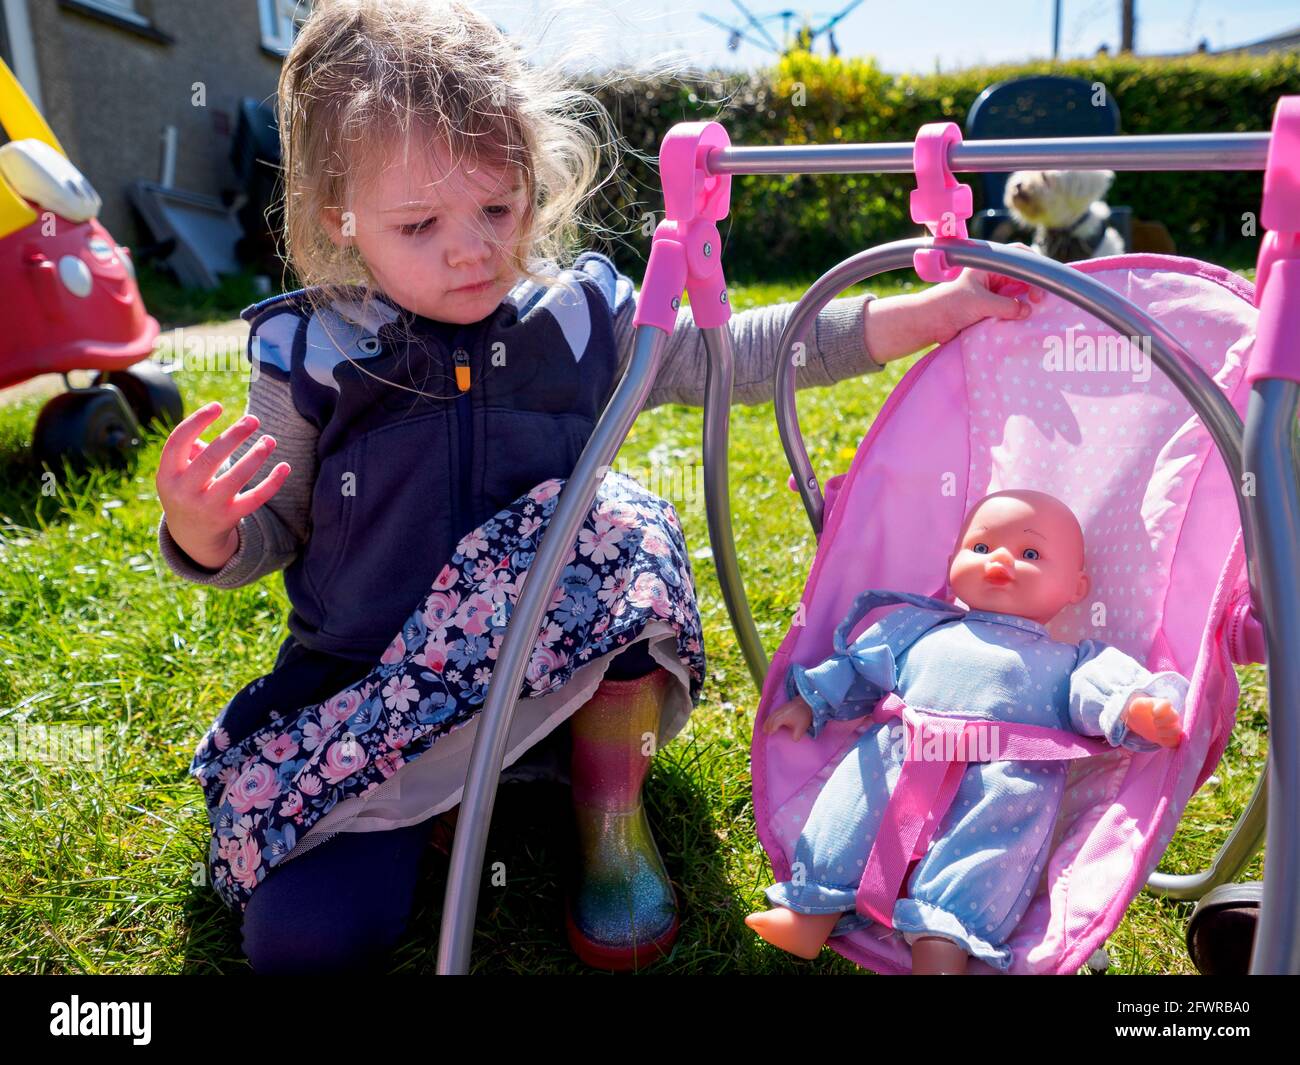 Toddler playing in the garden with a baby doll in a swing chair, UK Stock Photo